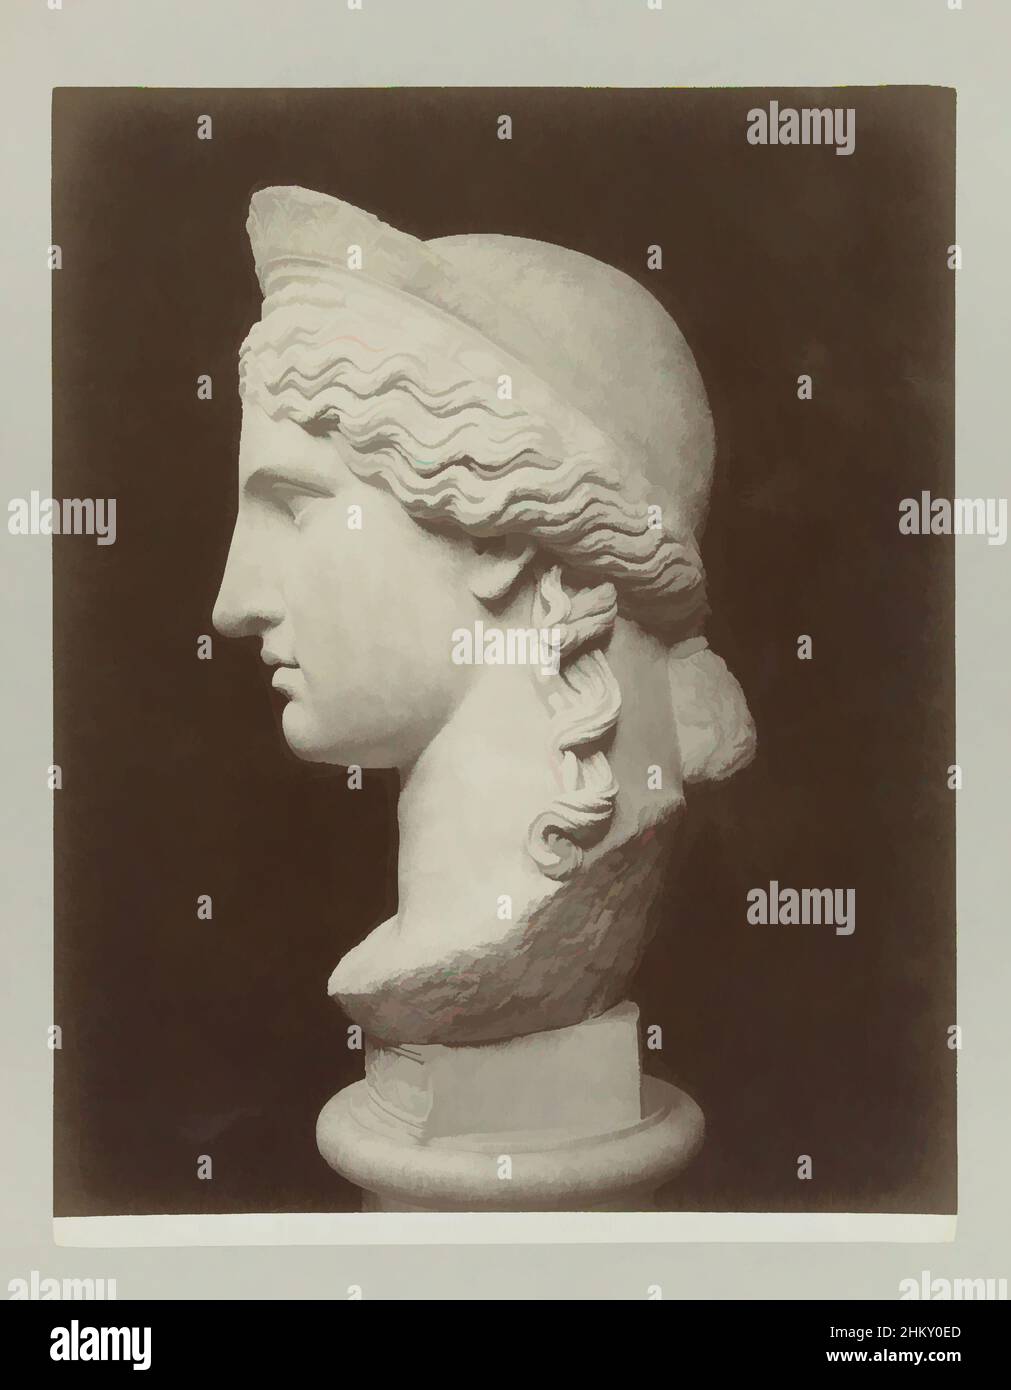 Art inspired by Bust of Giunone Ludovisi in profile1672 A Roma Museo Nazionale Giunone Ludovisi (di profilo), Rome, c. 1880 - c. 1904, paper, albumen print, height 258 mm × width 201 mmheight 327 mm × width 241 mm, Classic works modernized by Artotop with a splash of modernity. Shapes, color and value, eye-catching visual impact on art. Emotions through freedom of artworks in a contemporary way. A timeless message pursuing a wildly creative new direction. Artists turning to the digital medium and creating the Artotop NFT Stock Photo